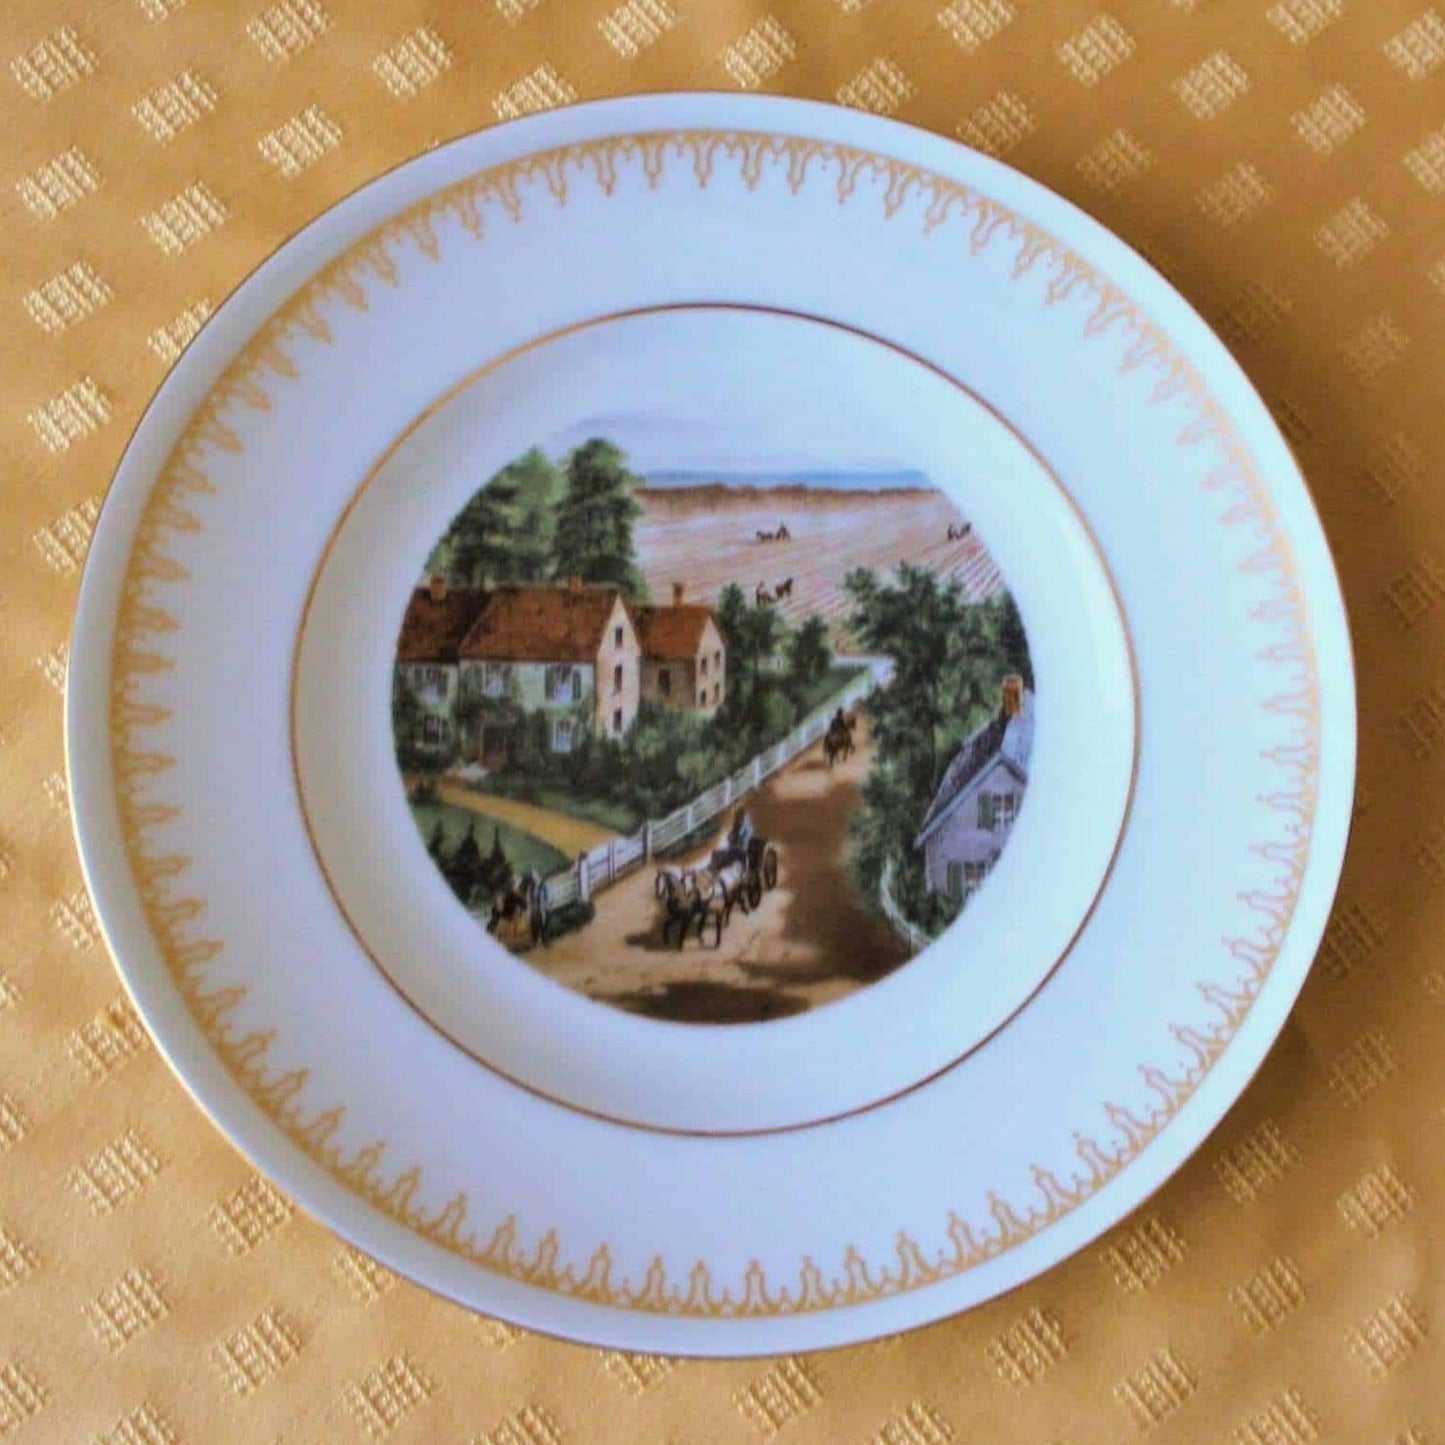 Decorative Plate, Bing & Grondahl, Currier & Ives, The Western Farmer's Home, Vintage